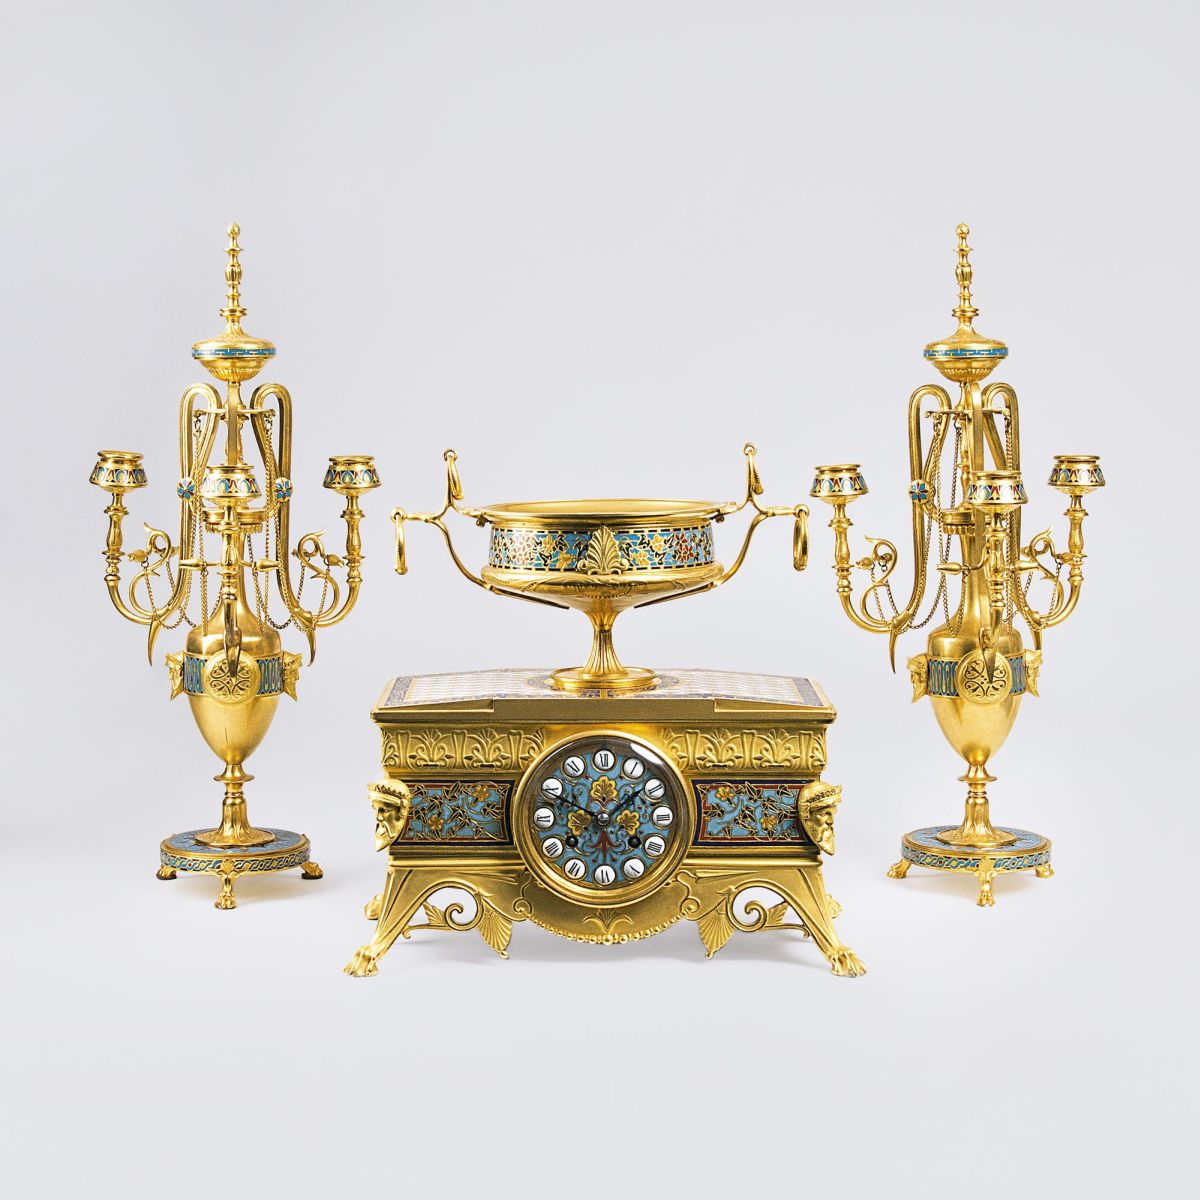 A rare Napoléon III. Fireplace Set with fine Cloisonné Ornaments: Pendule, Bowl and Pair of Candle Holders